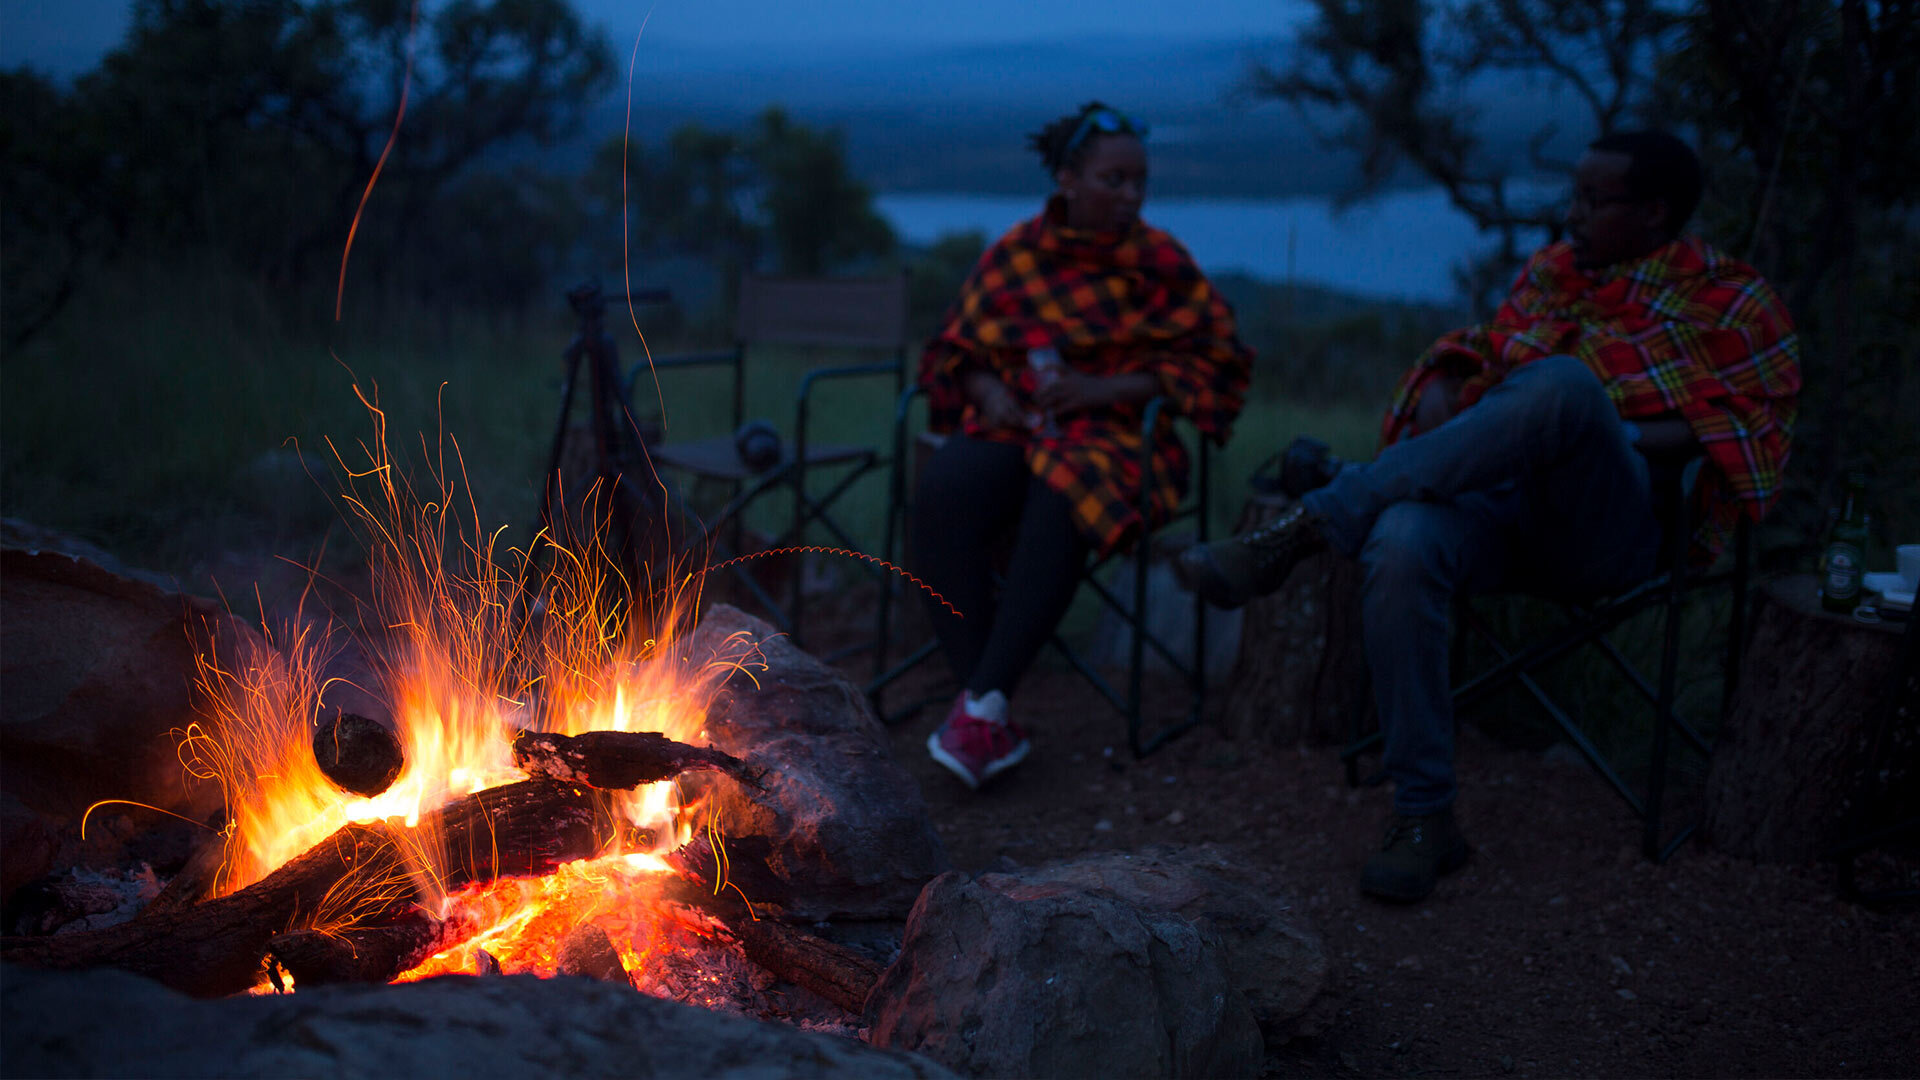 People sitting around a campfire with a view of Ihema Lake in the background